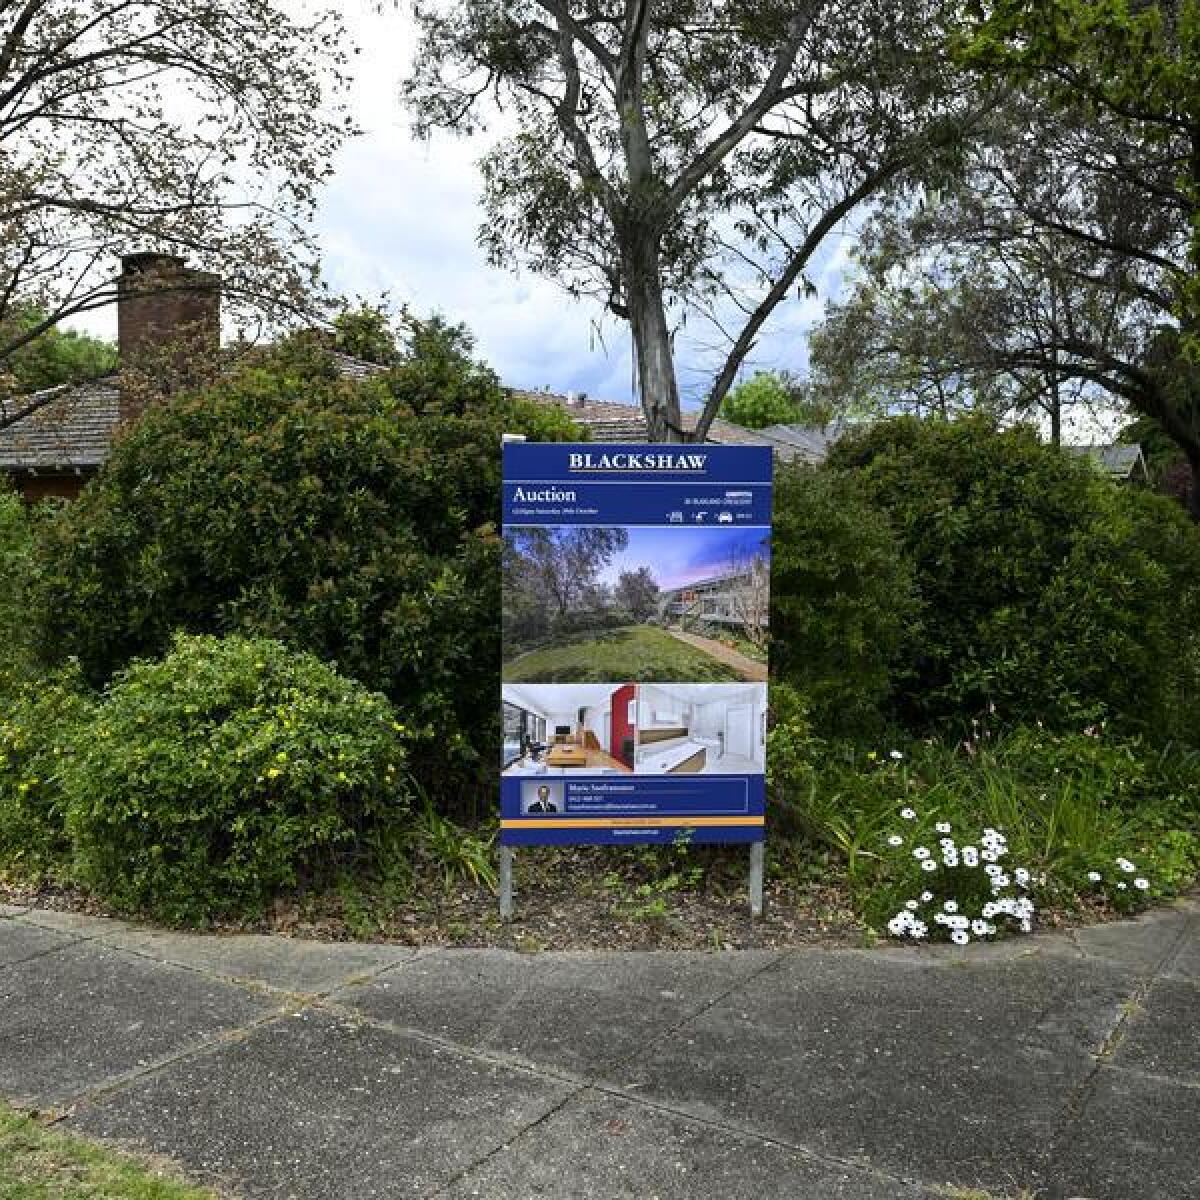 An auction sign in front of a house.